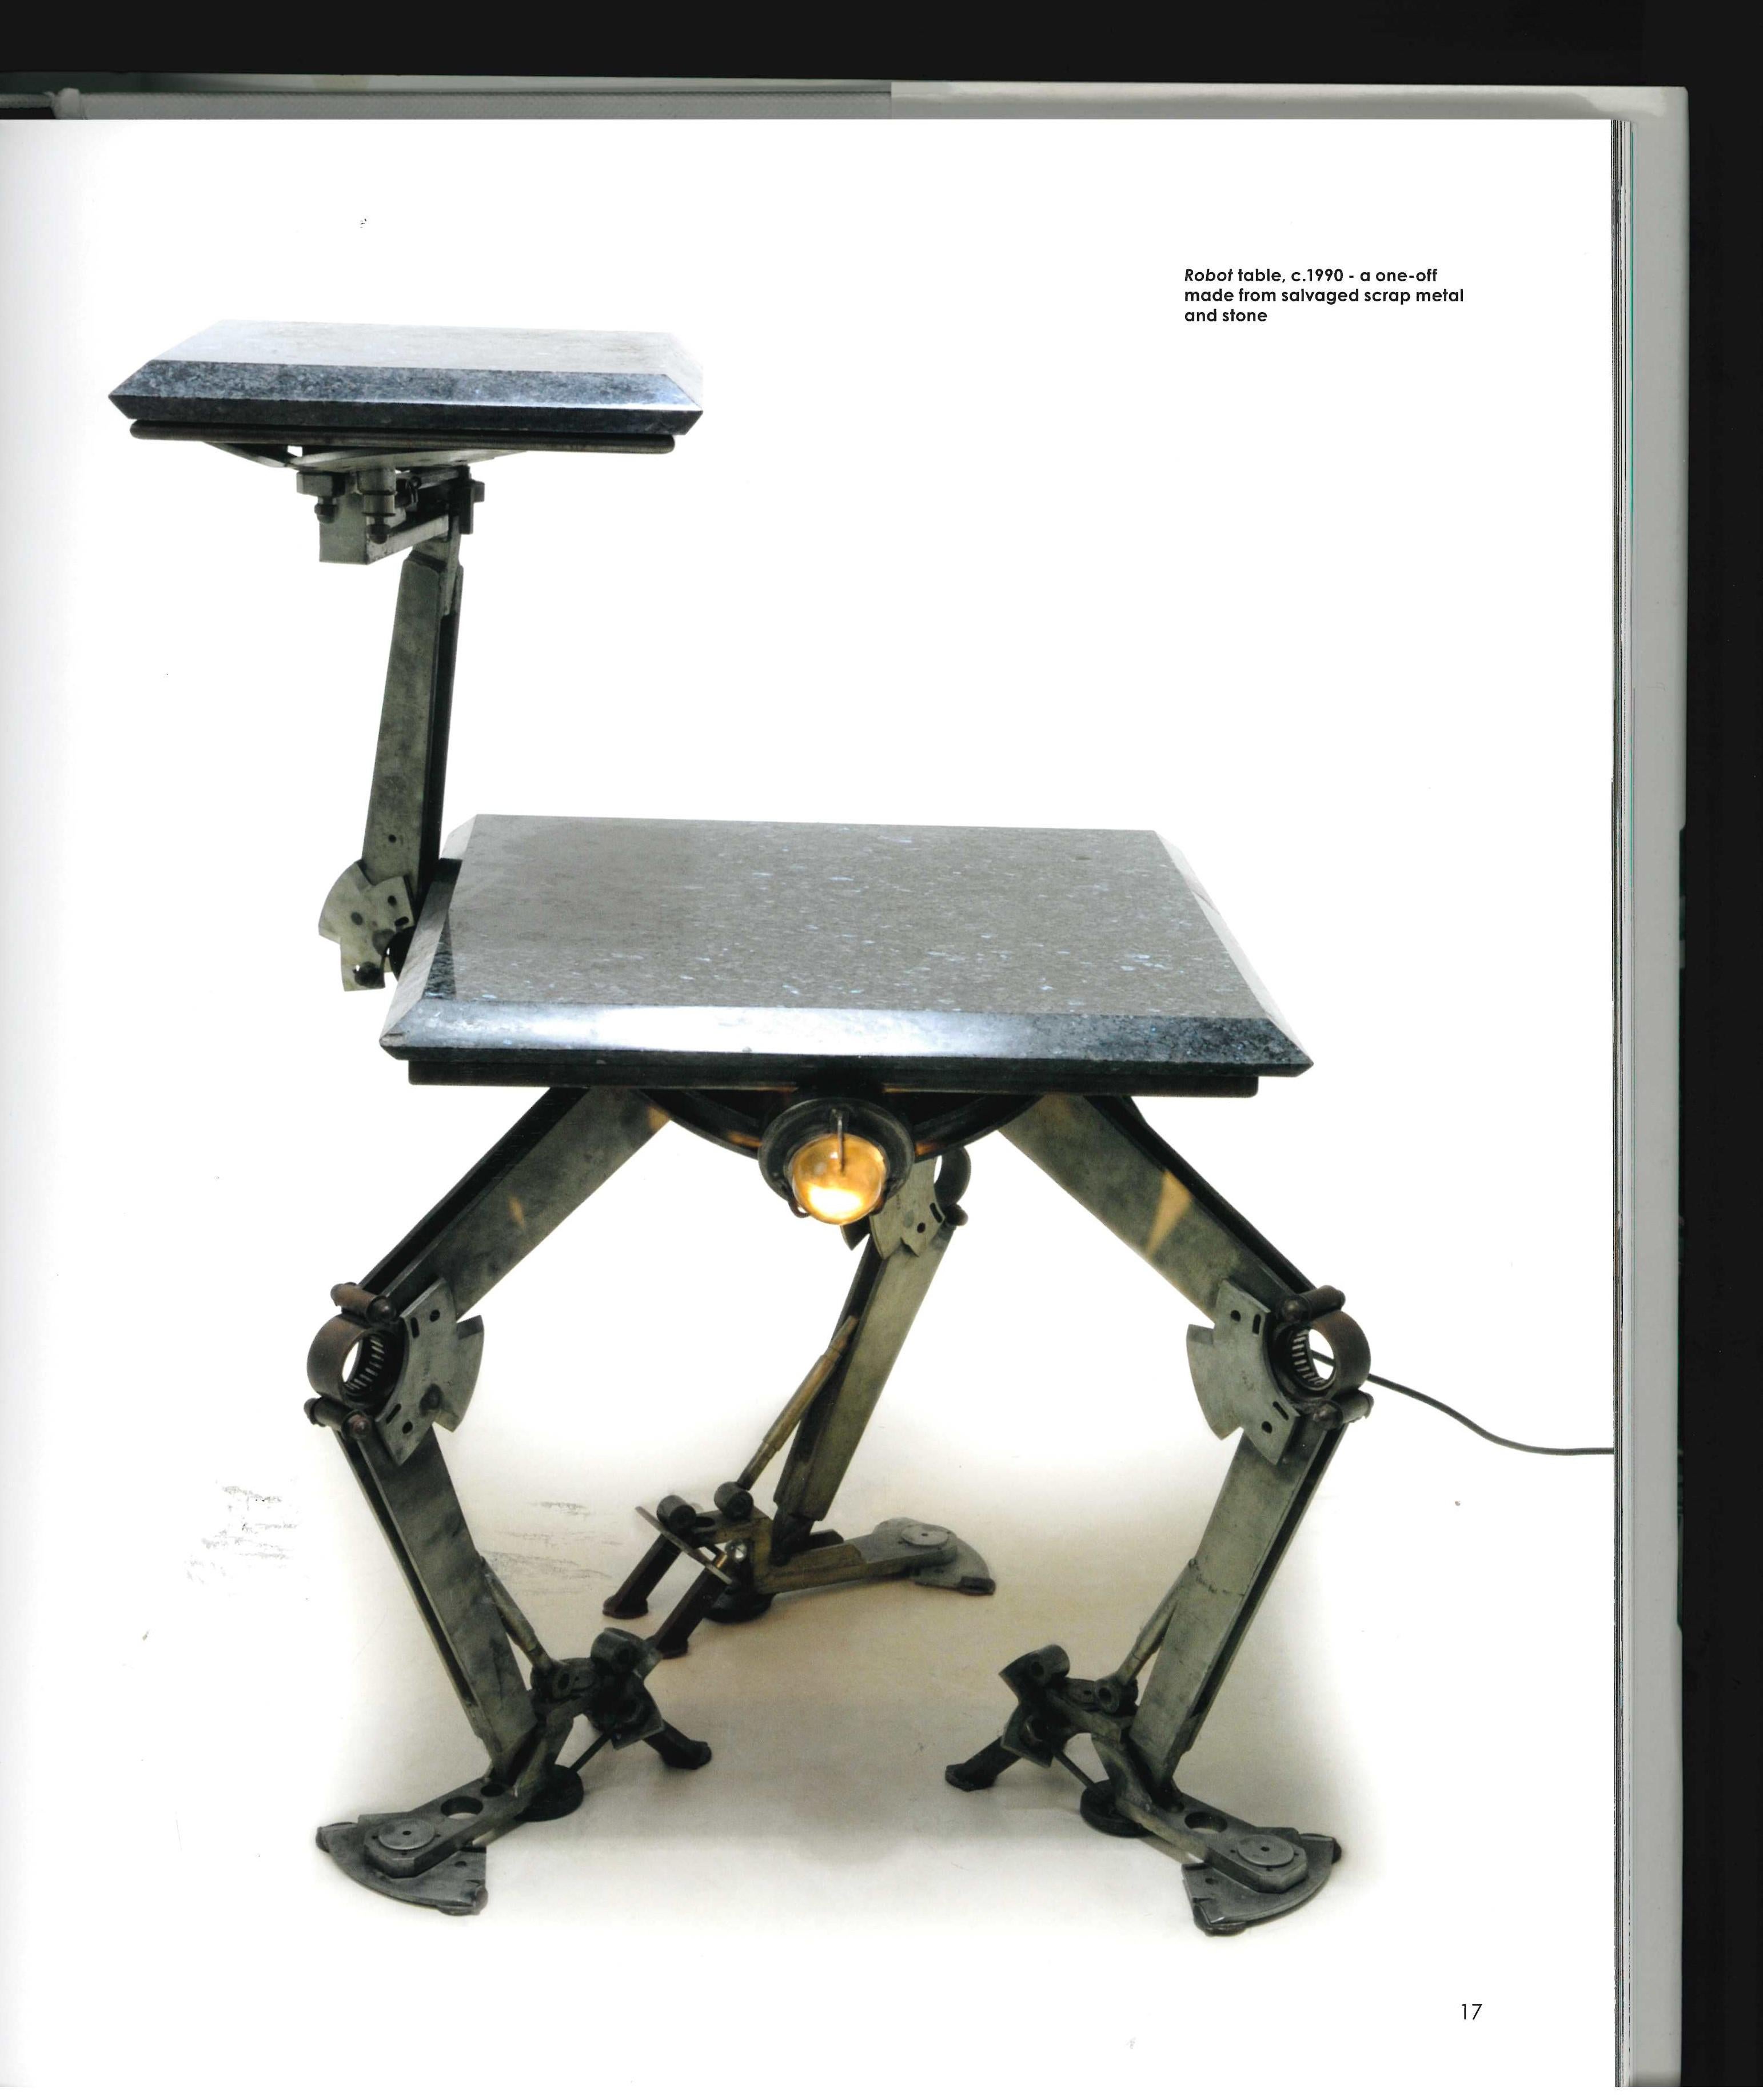 Mark Brazier-Jones is an important designer, furniture maker and lighting designer from the last two decades of the 20th century and into the 21st century. This is an important catalogue raisonne of his work. His work is now found in Museum's around